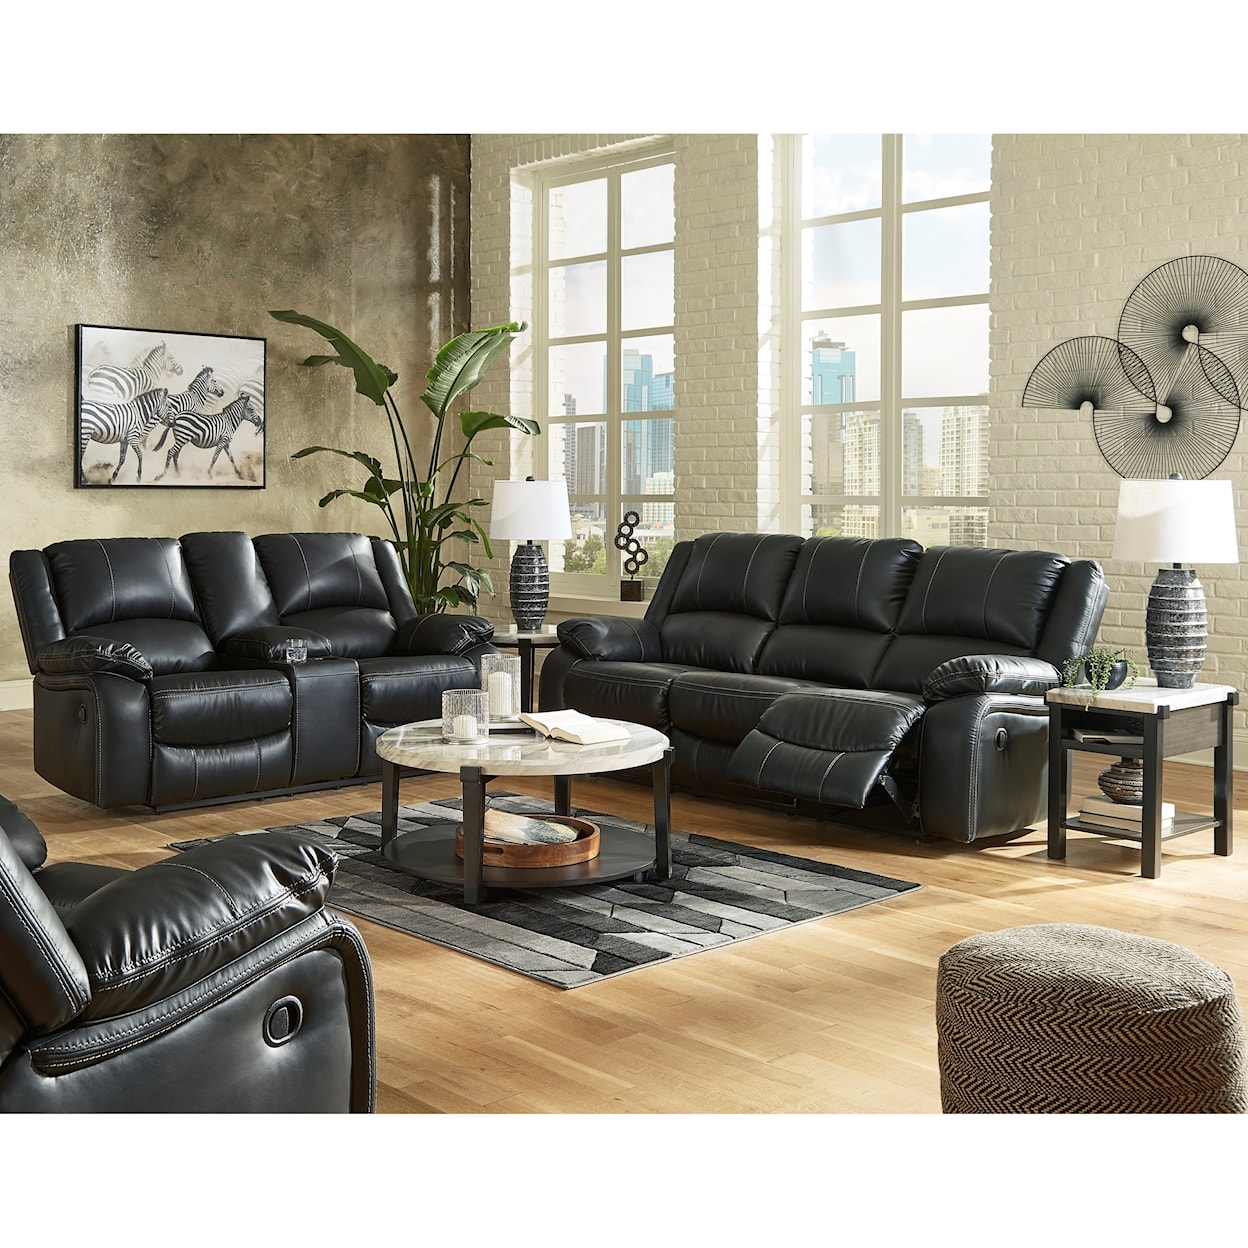 Signature Design by Ashley Calderwell Power Reclining Living Room Group